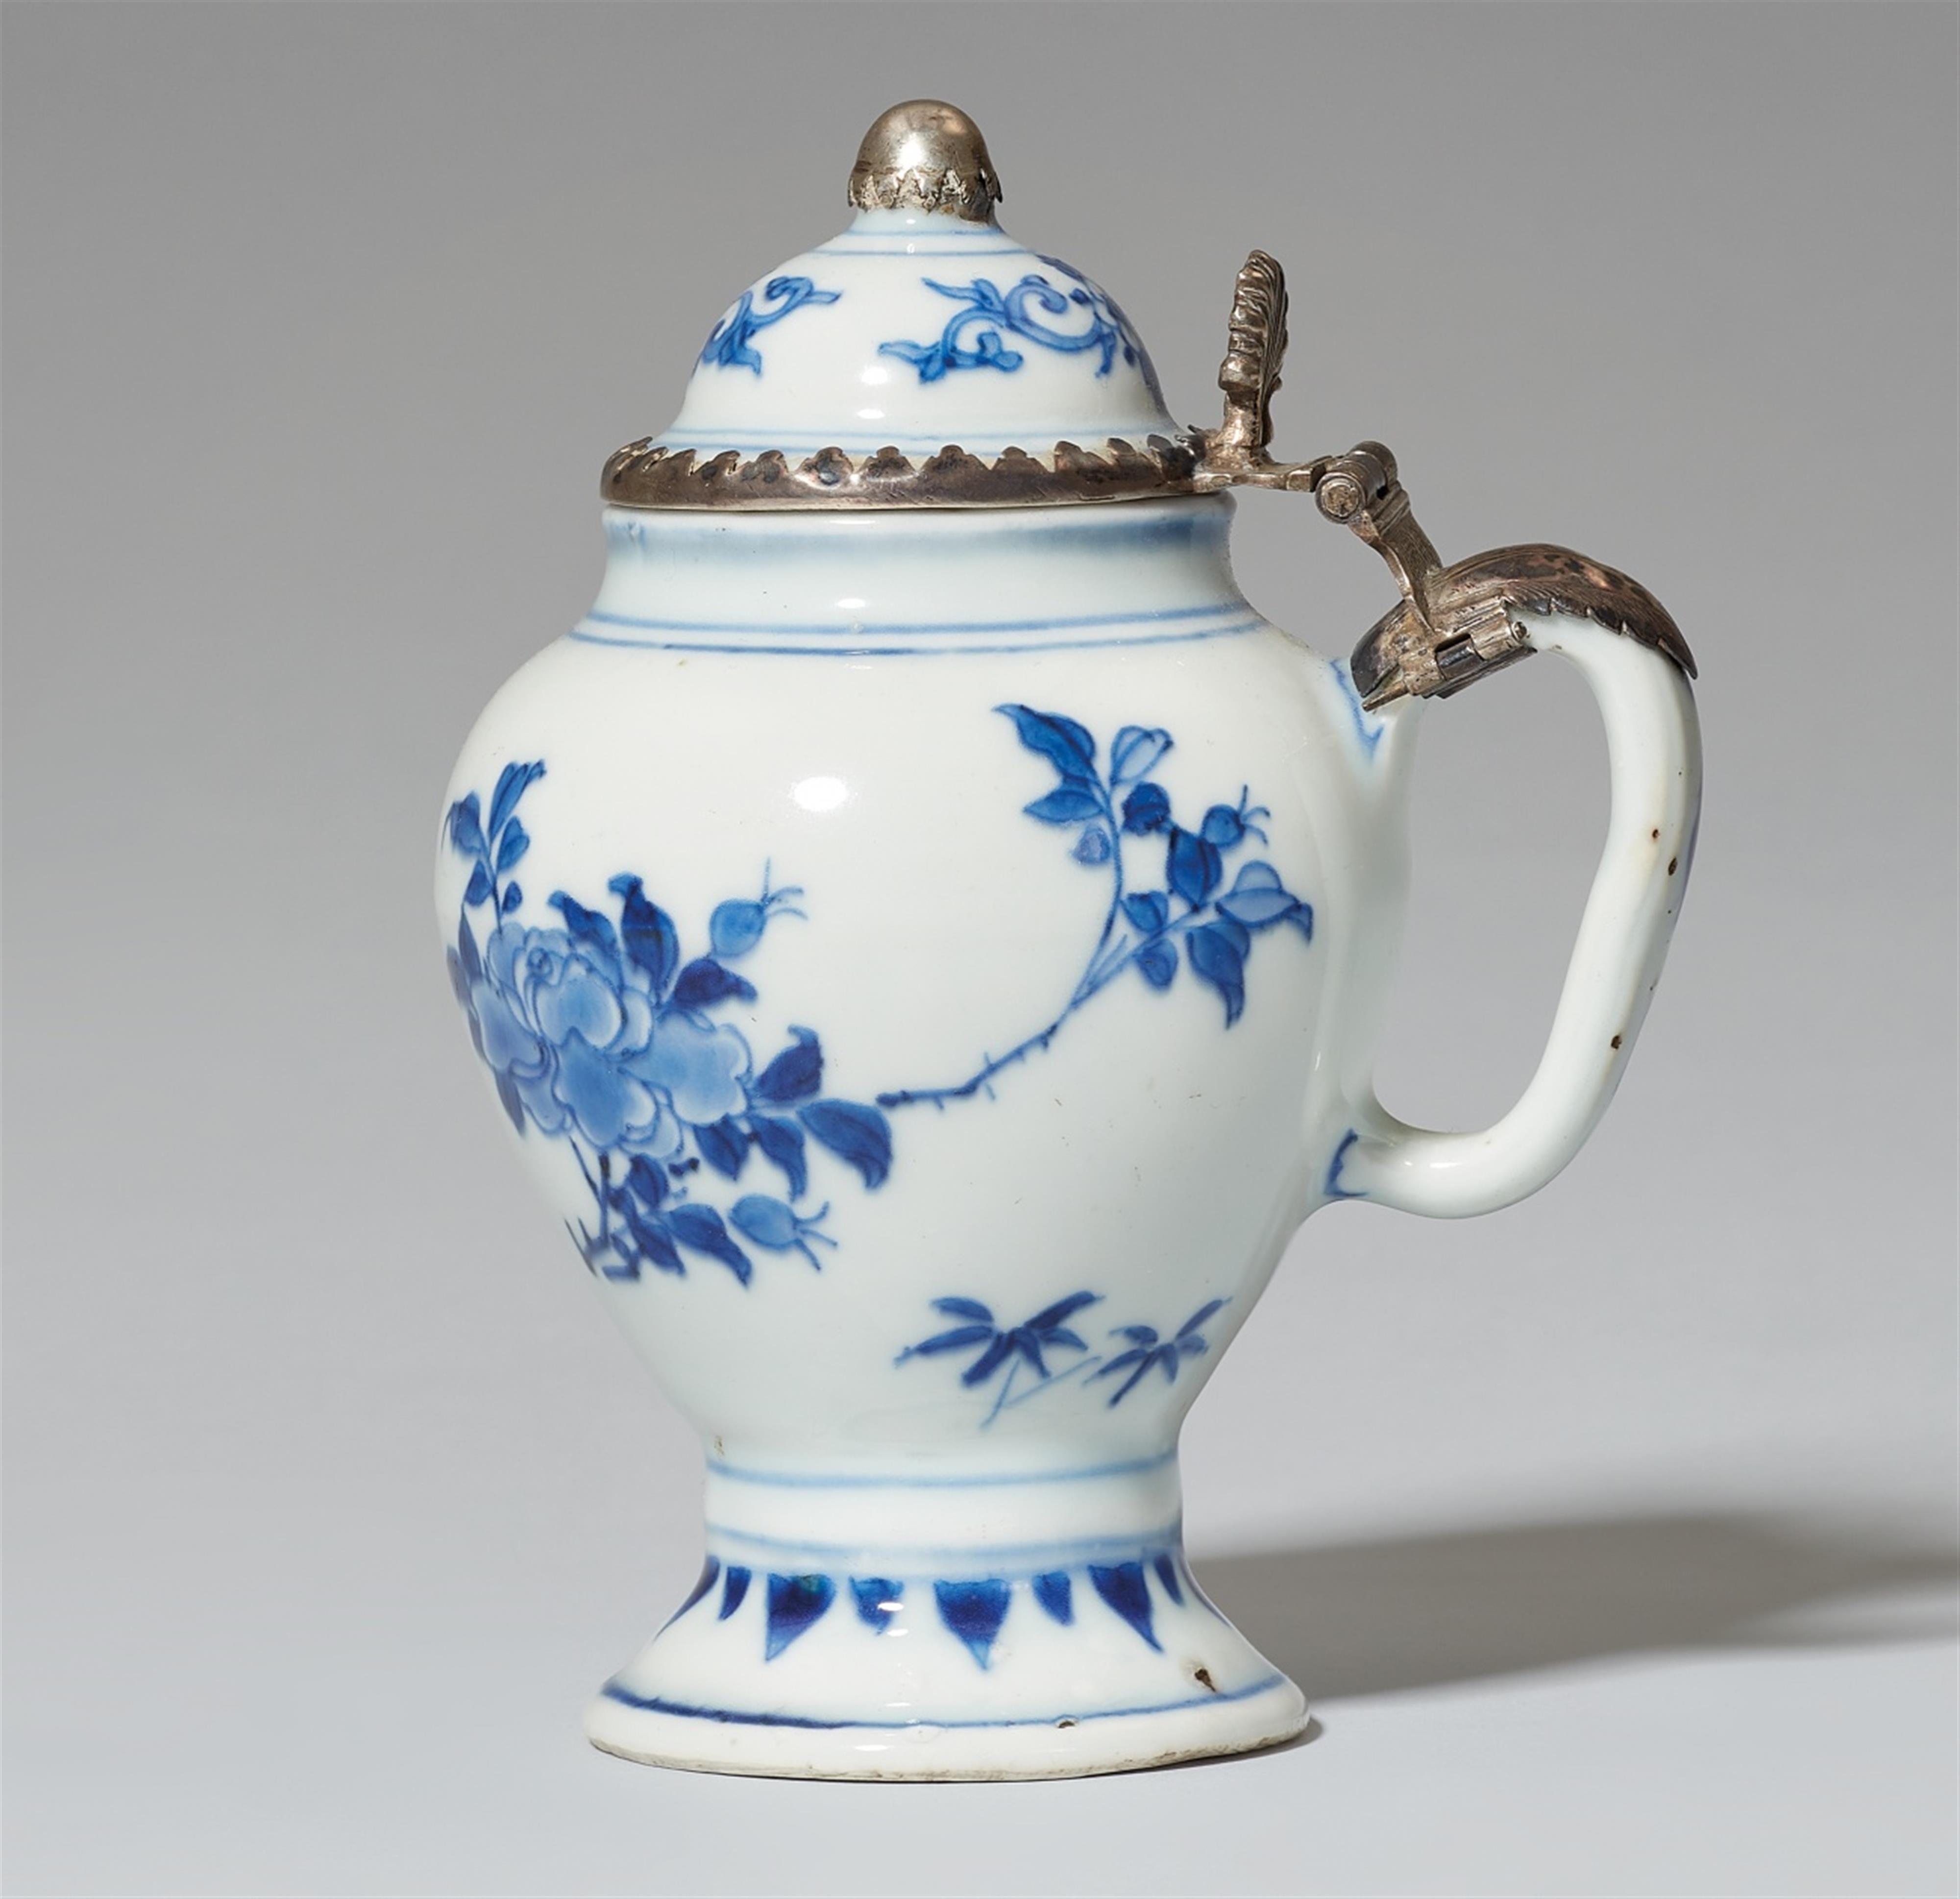 A blue and white silver-mounted covered mustard pot. Mid-17th century - image-1